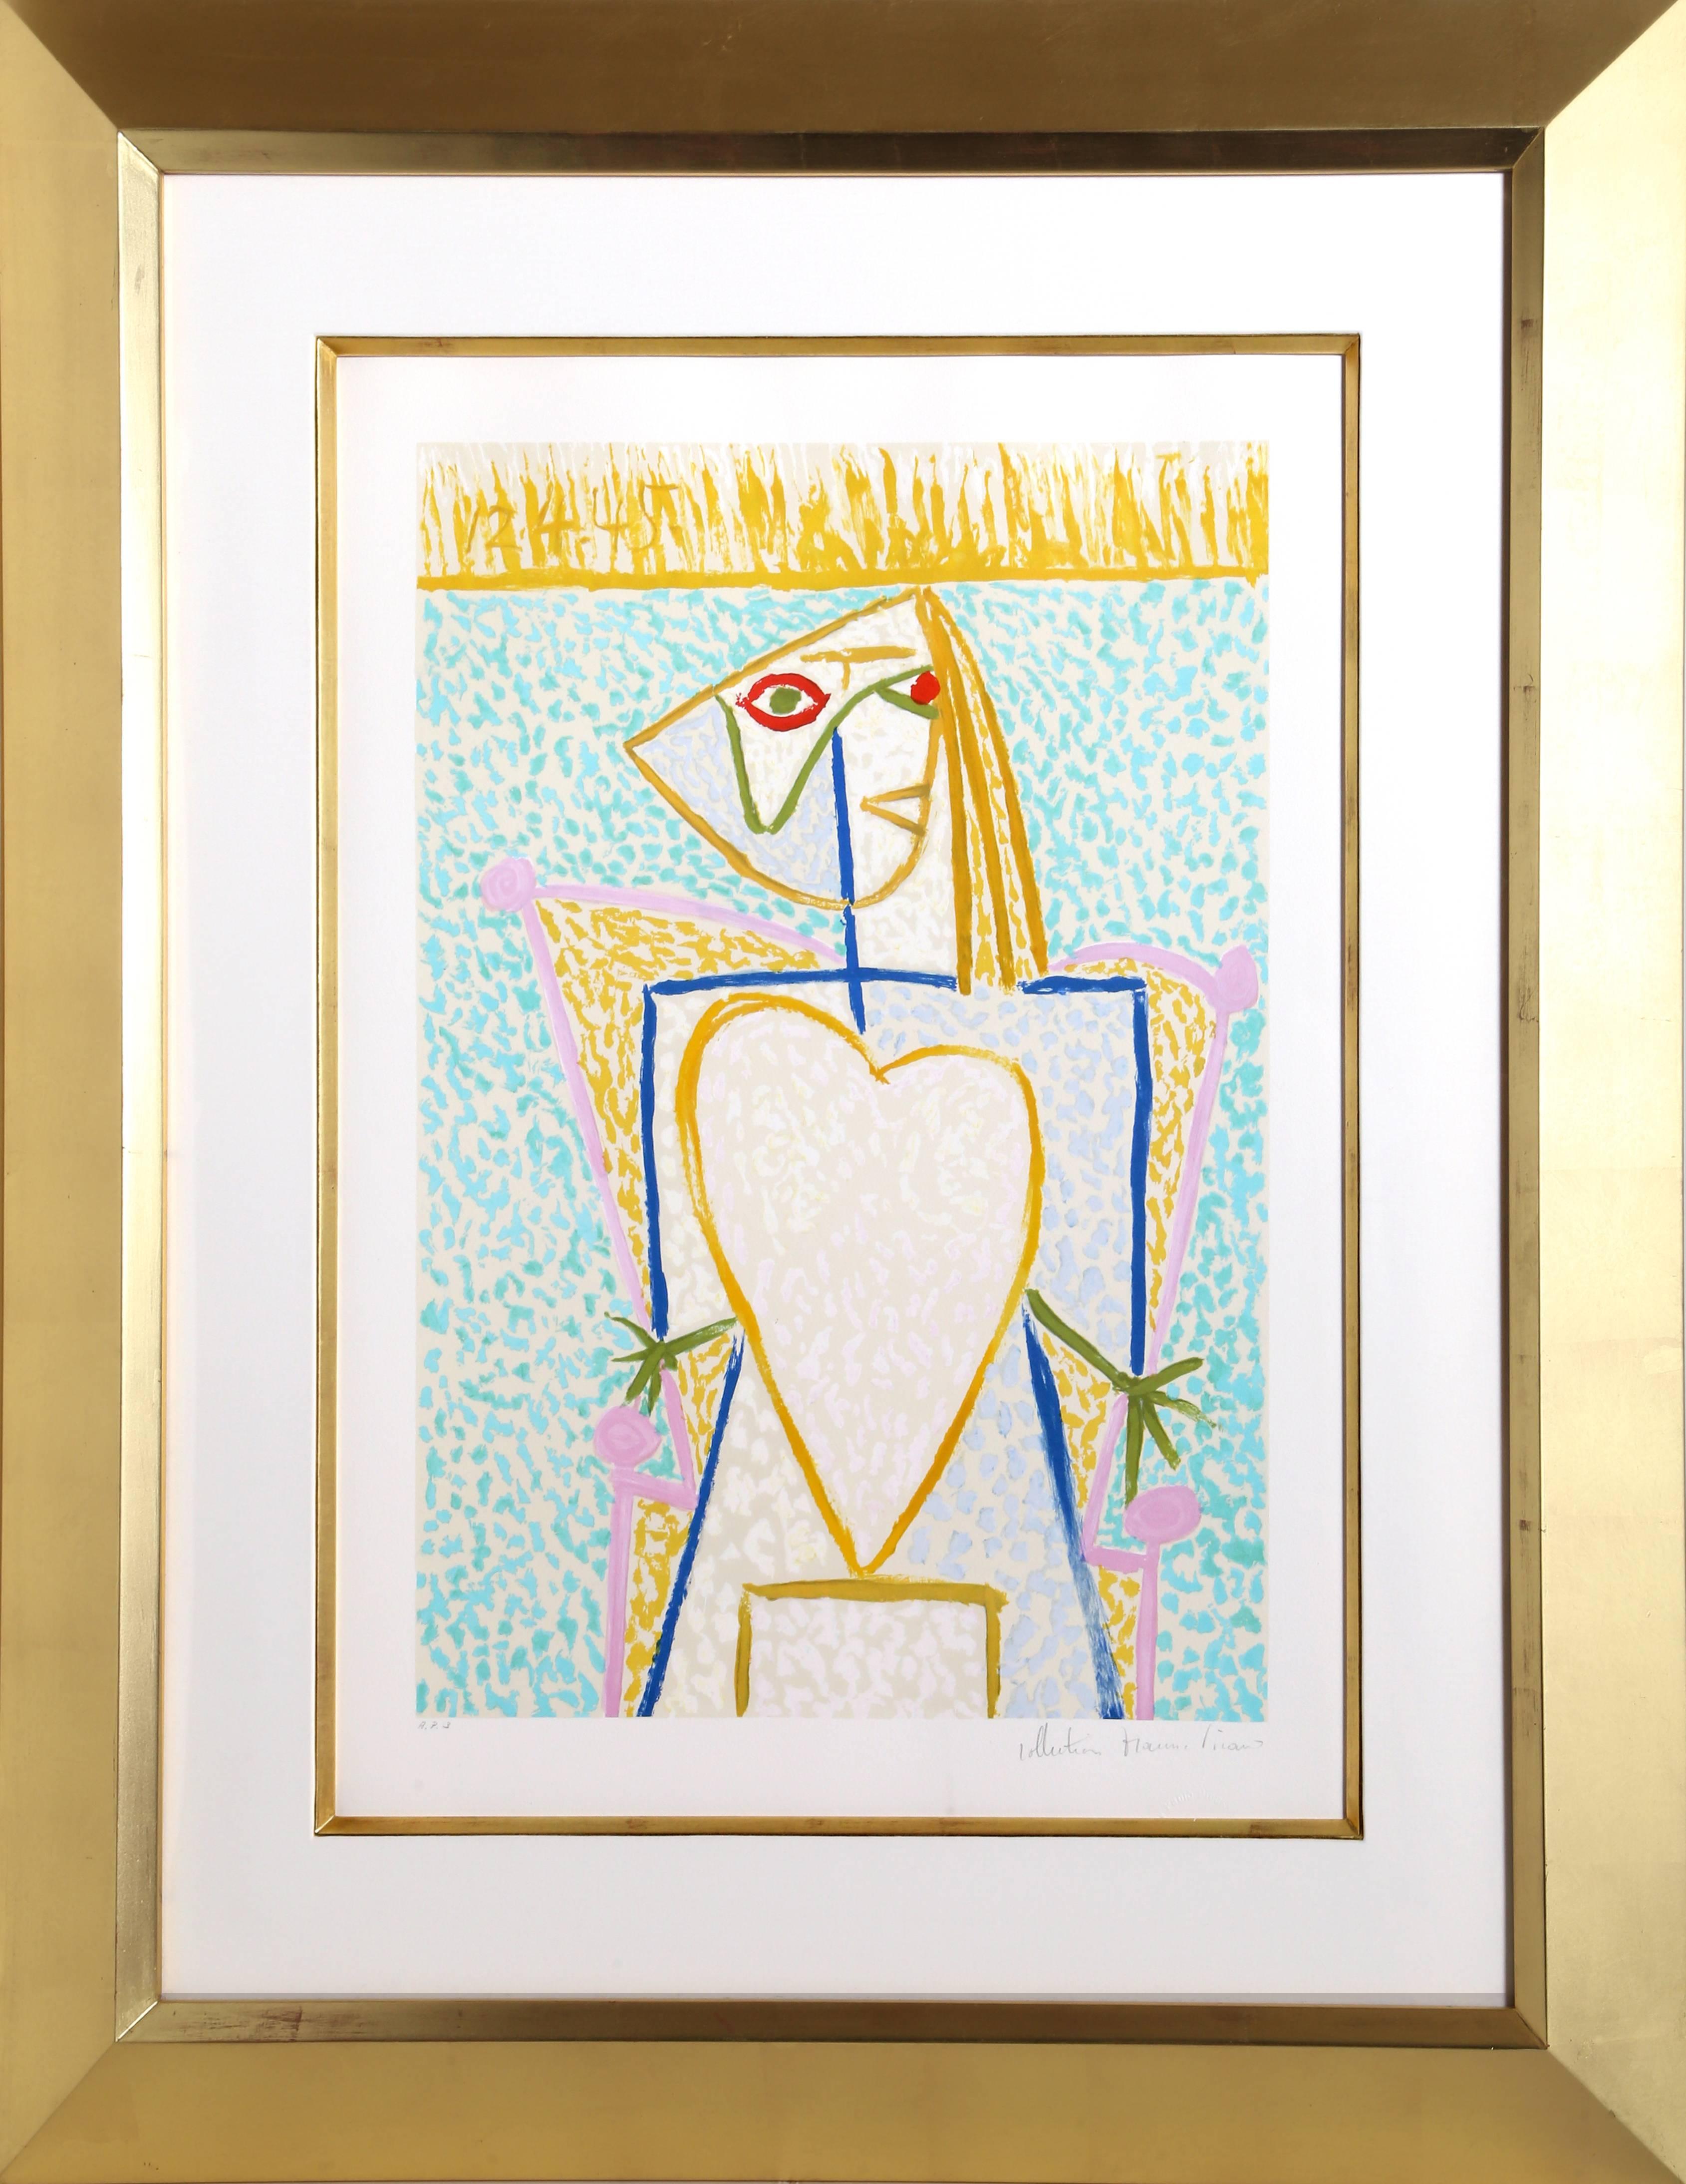 Sitting in an armchair, the woman with a heart-shaped torso is rendered with simple rectangular shapes outlined by cobalt blue and bright yellow. Set against a soft pastel background of pink and blue, Pablo Picasso's print features the artist's